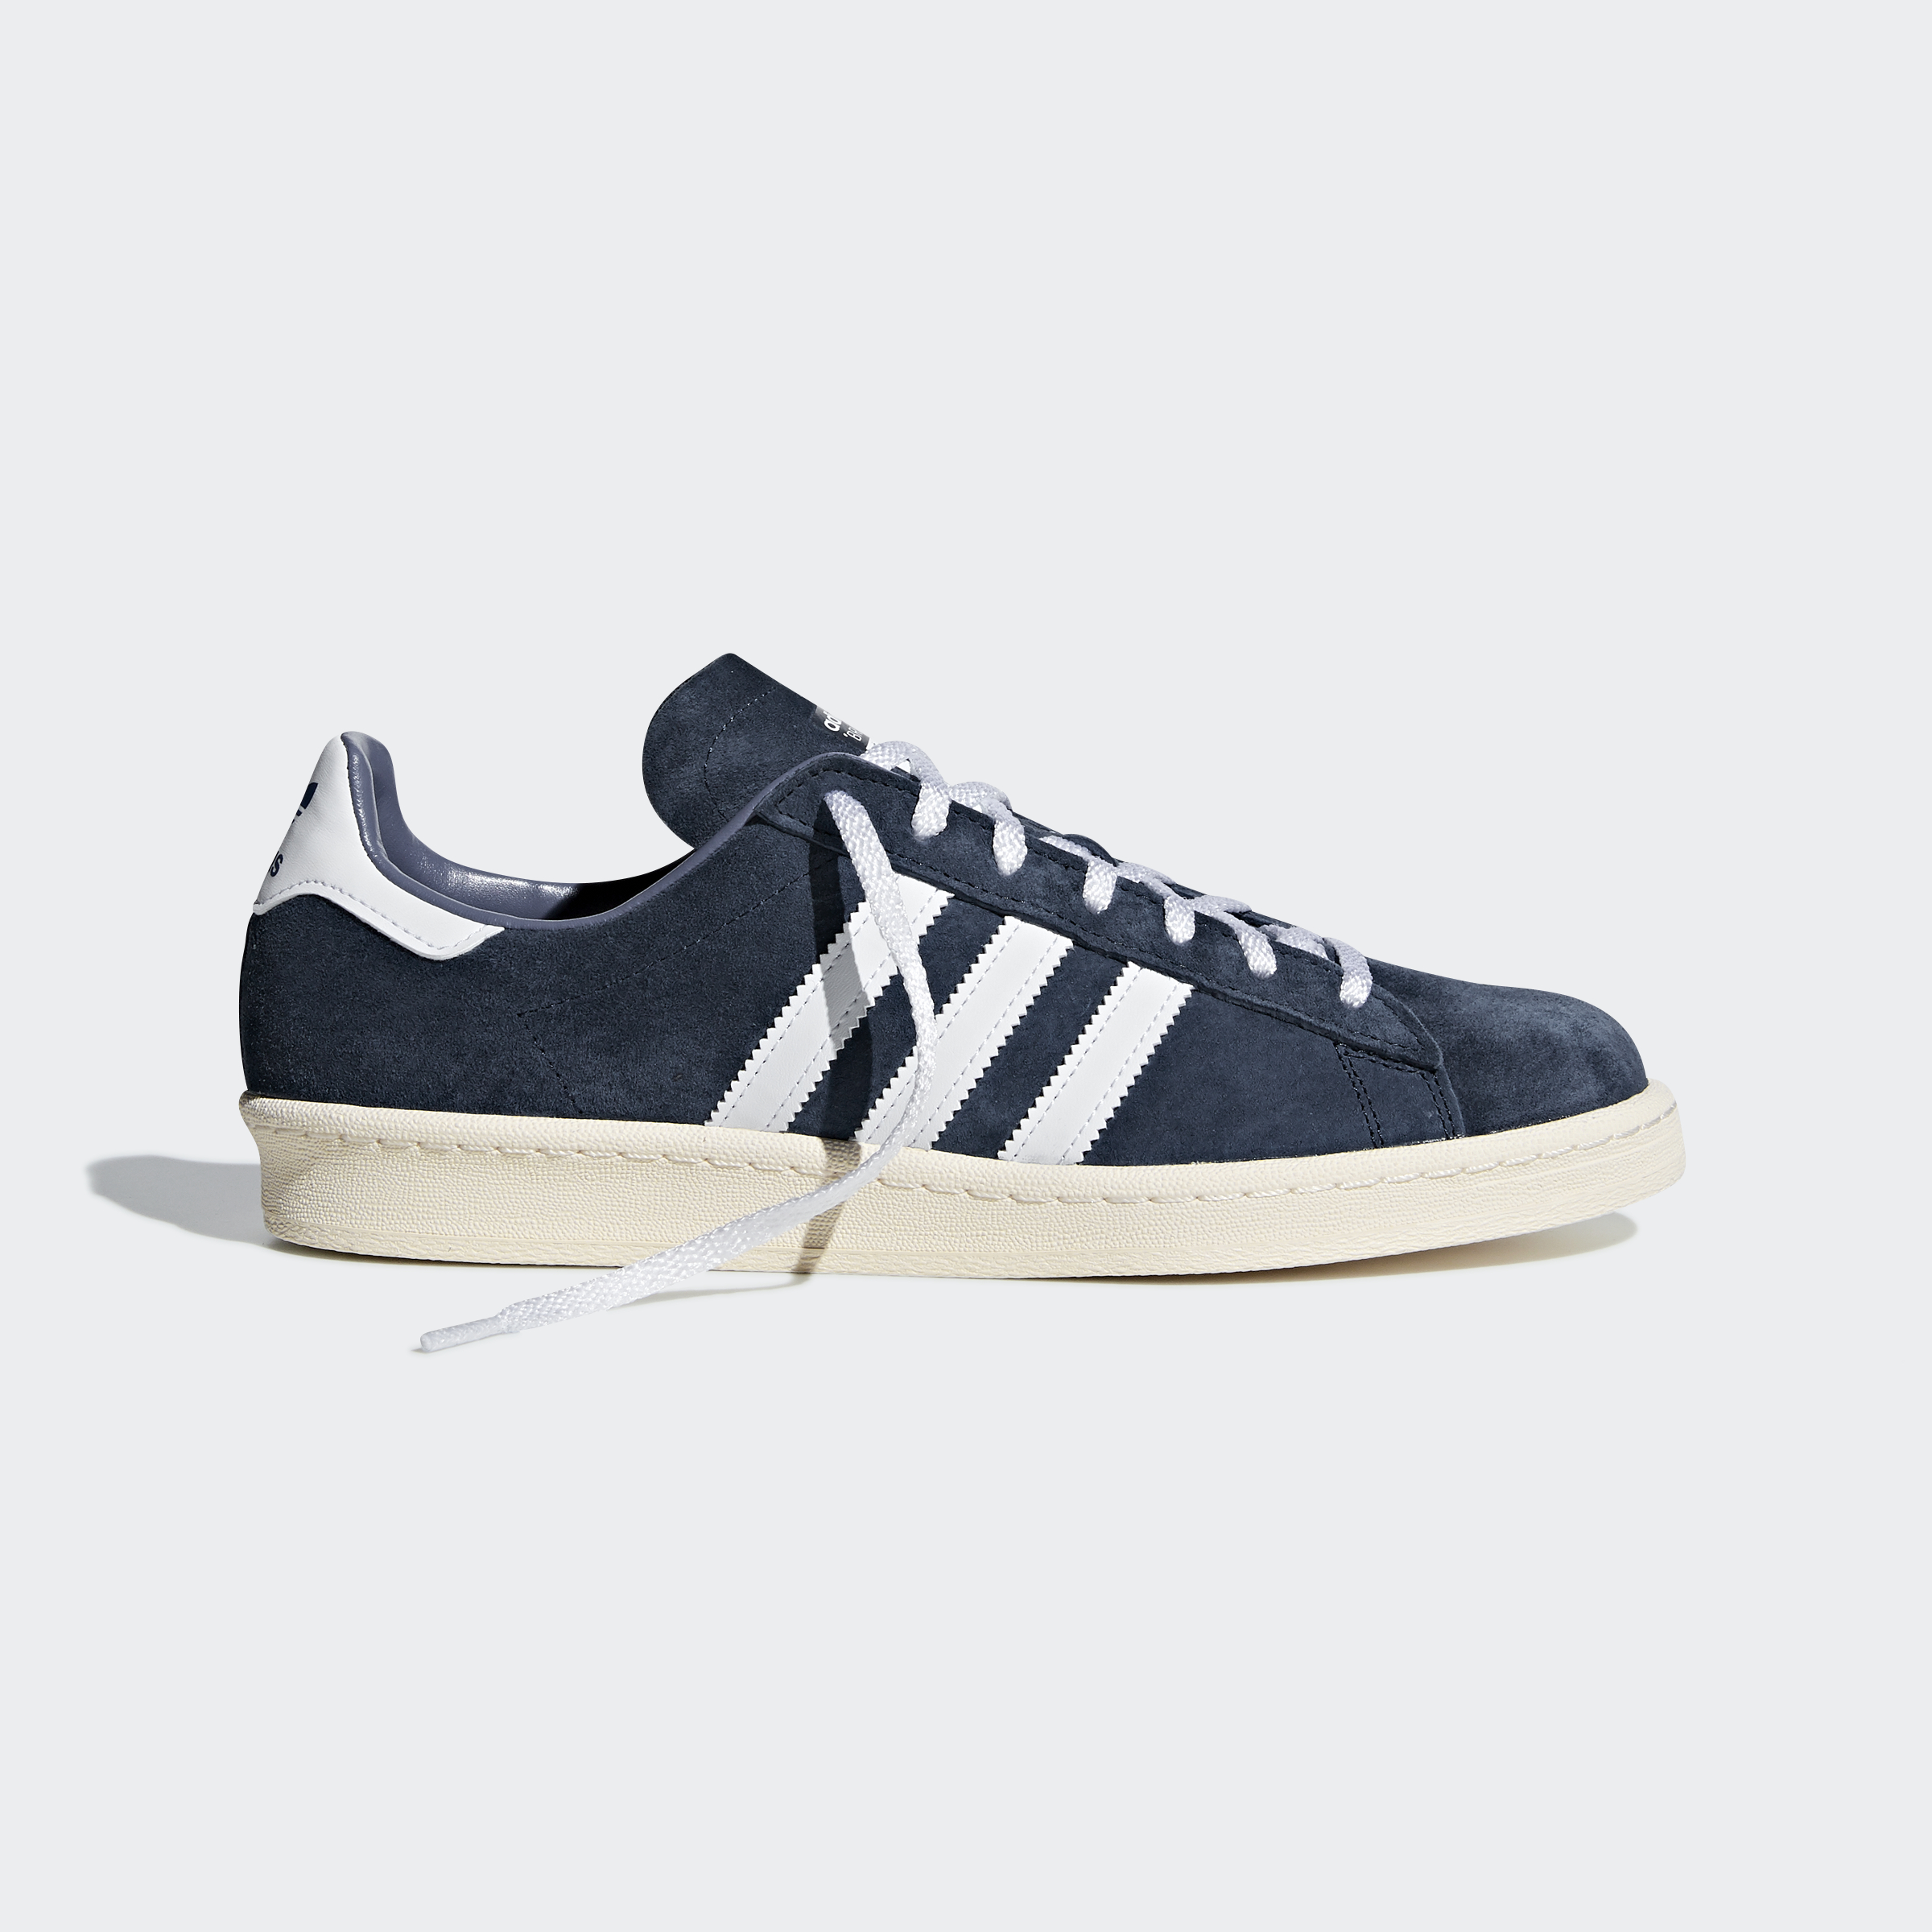 Adidas Campus '80s RYR Shoes at £84.95 | love the brands